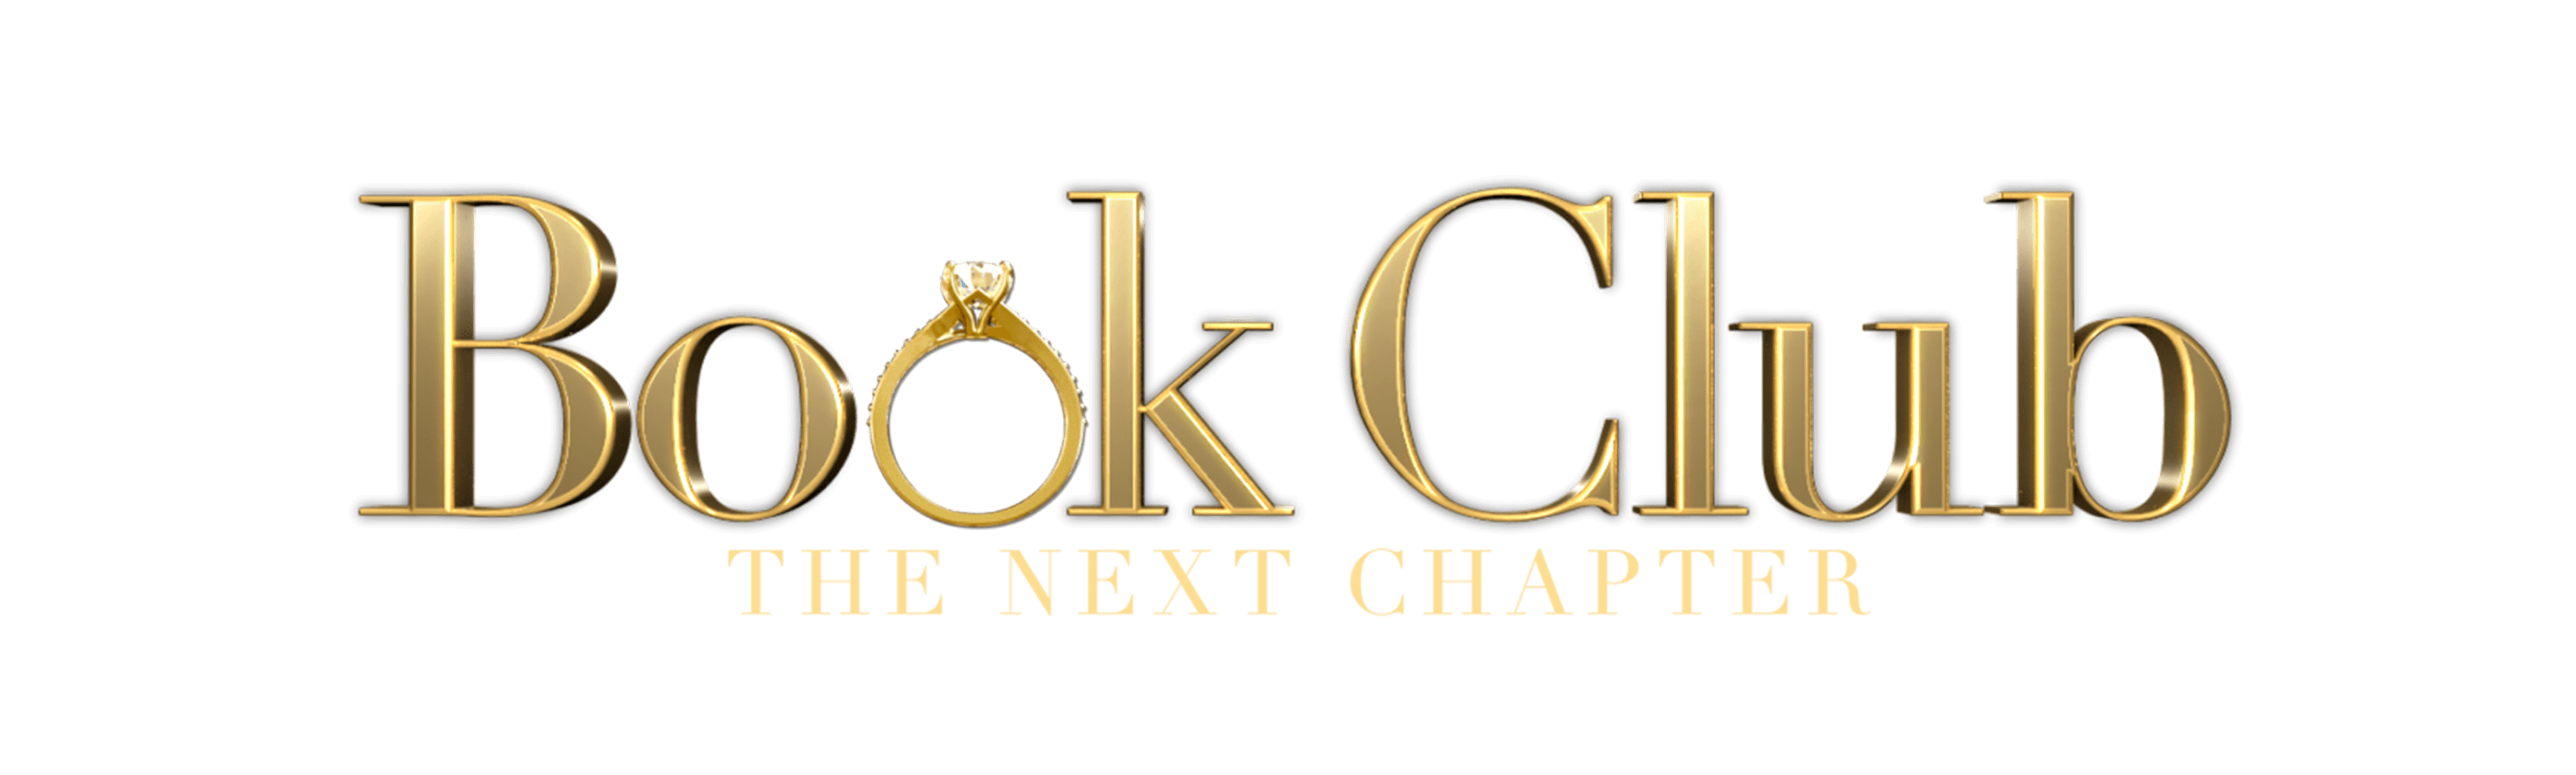 Book Club: The Next Chapter Official Site